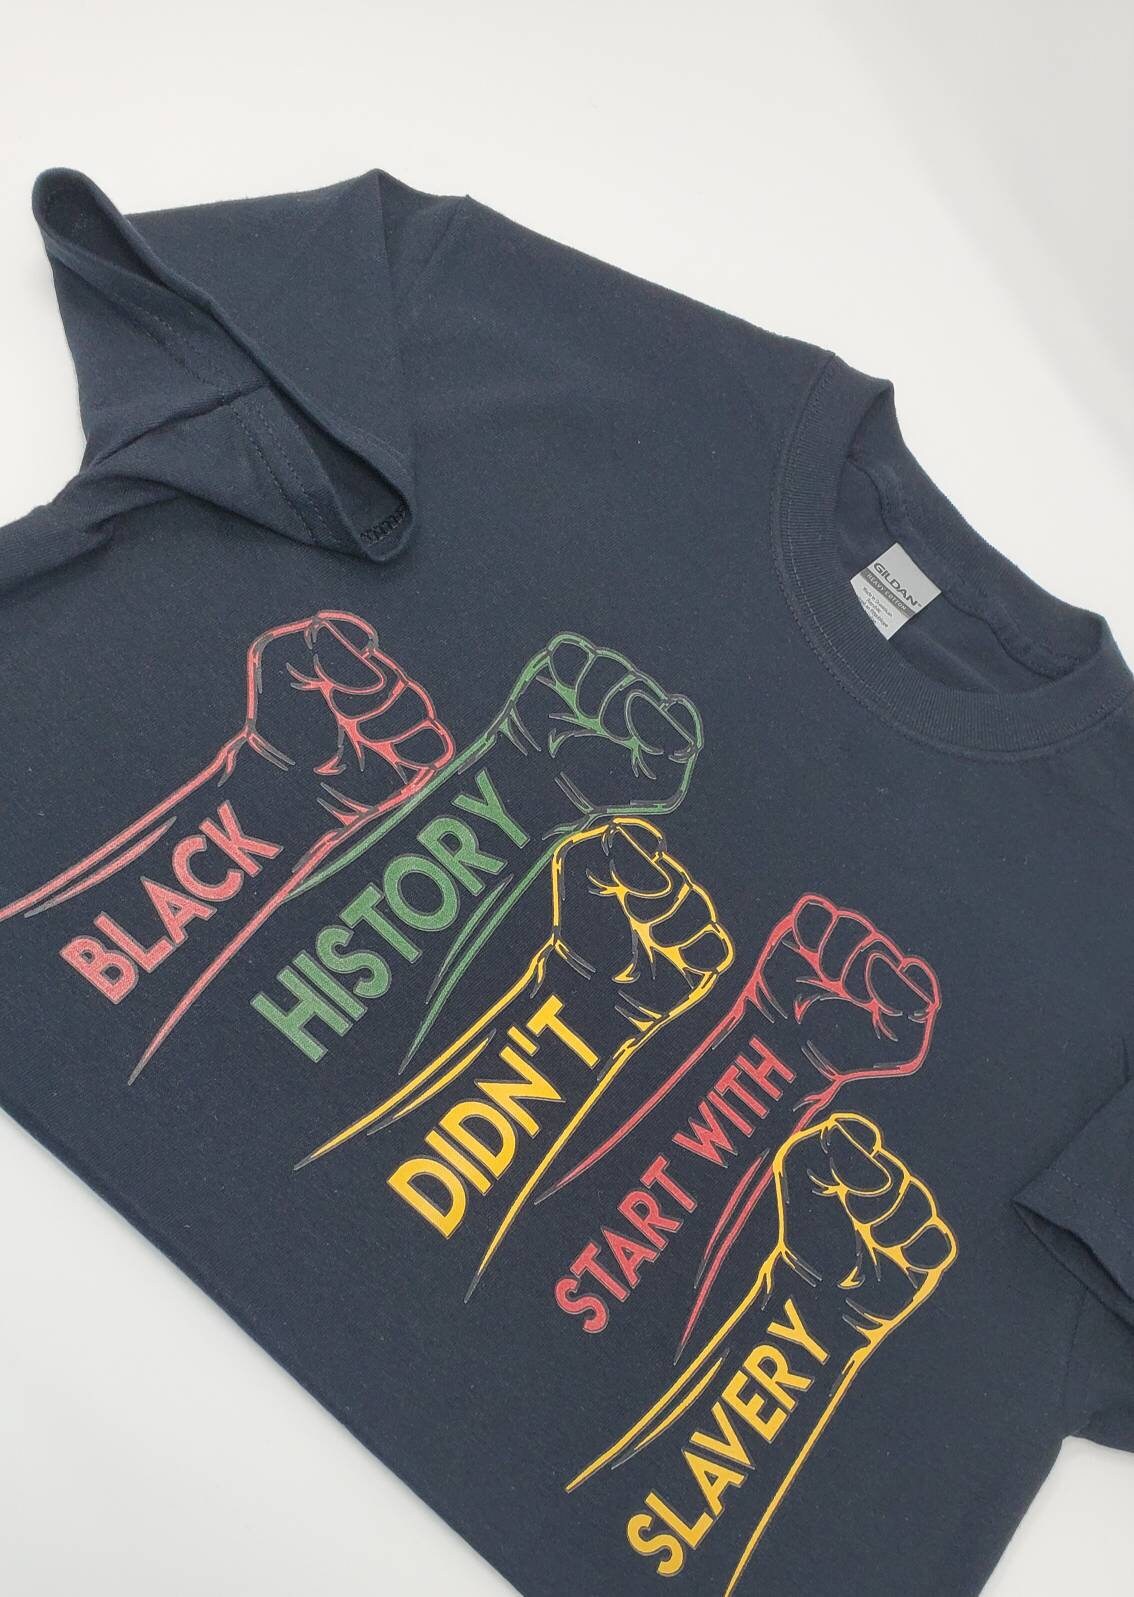 Black-History-Month Black-History-Sale T-shirt | "Black History Didn't Start with Slavery" | Colorful Statement Tee | Juneteenth Celebration